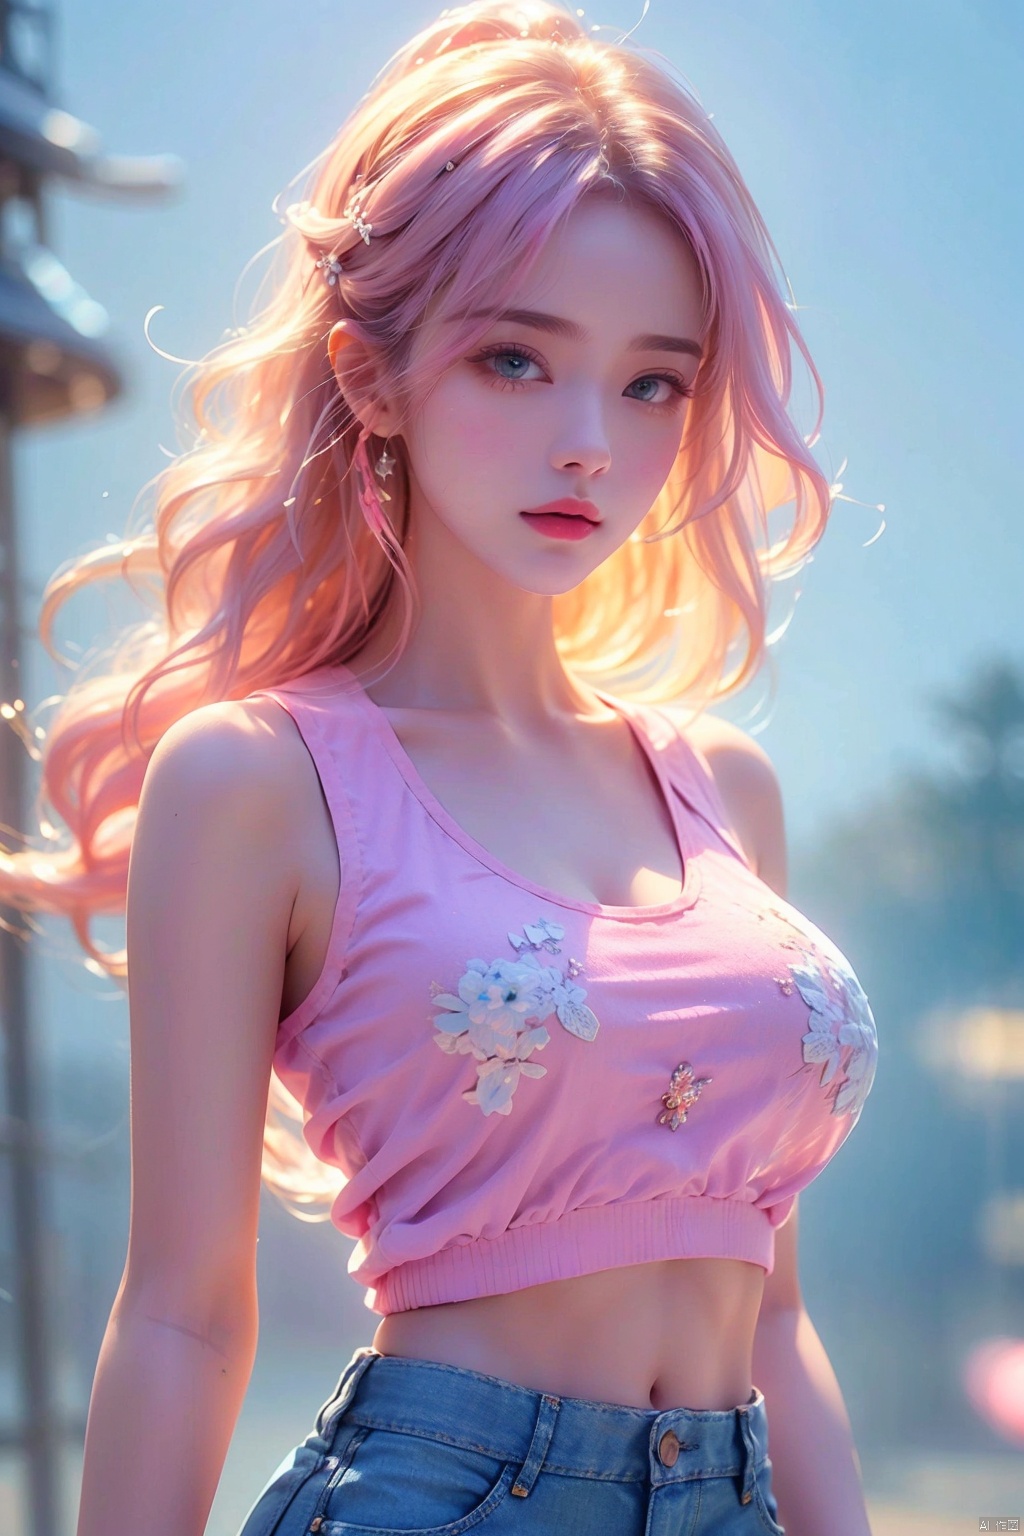 1 girl, (8k, original photo, best quality, Masterpiece: 1.3), (realistic, realistic: 1.37), (daytime), (Looking at the audience: 1.331), Posing, (Tokyo Tower:1.4), ((Daytime City View)), (Real city),((Clear background)), soft light, 1 girl, extremely beautiful face, ((Perfect lively breasts)), (Big boobs:1.5),(Bare cleavage:1.2), put down hands, random hairstyle, (Long light pink hair:1.5), random expression, big eyes, small belly,((((White short **** top)))), ((((Light blue denim short shorts)))), mix4, an extremely delicate and beautiful girl, beautiful face,beautiful eyes, beautiful girl, 8k wallpaper, (best quality: 1.12), (Detailed: 1.12), (Complex: 1.12), (Ultra Detailed: 1.12), (Advanced: 1.12), Ultra Detailed, Ultra Detailed, High Resolution Illustration, Color, 8k wallpaper, highres, Movie Light, Ray Tracing, (8k, Original photo, best Quality, Masterpiece, Ultra High, Ultra Detailed: 1.2), ((realistic, photo-realistic)),yuzu,(large breasts),(breast expansion), (cleavage),